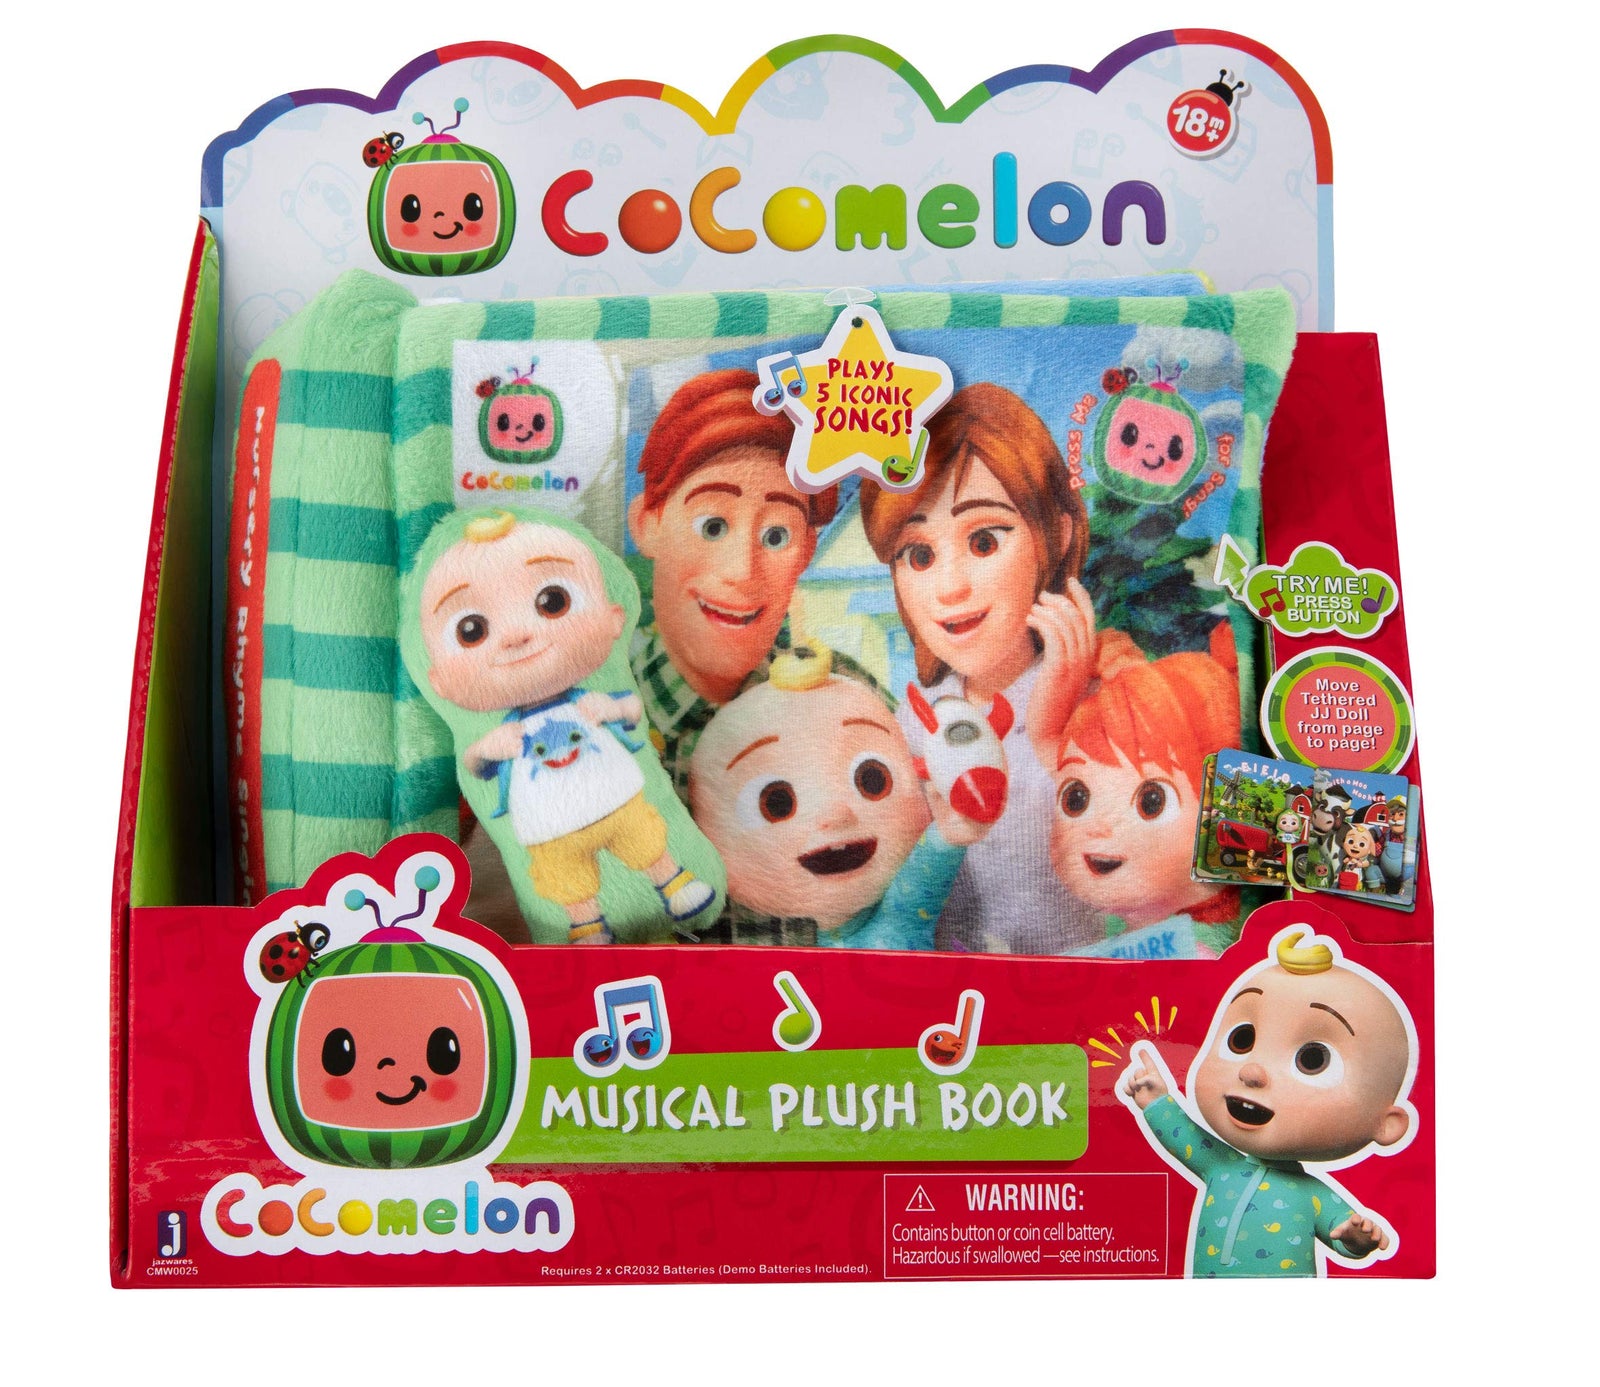 CoComelon Nursery Rhyme Singing Time Plush Book, Featuring Tethered JJ Plush Character Toy, for JJ’s Daily Musical Adventures – Books for Babies and Young Children